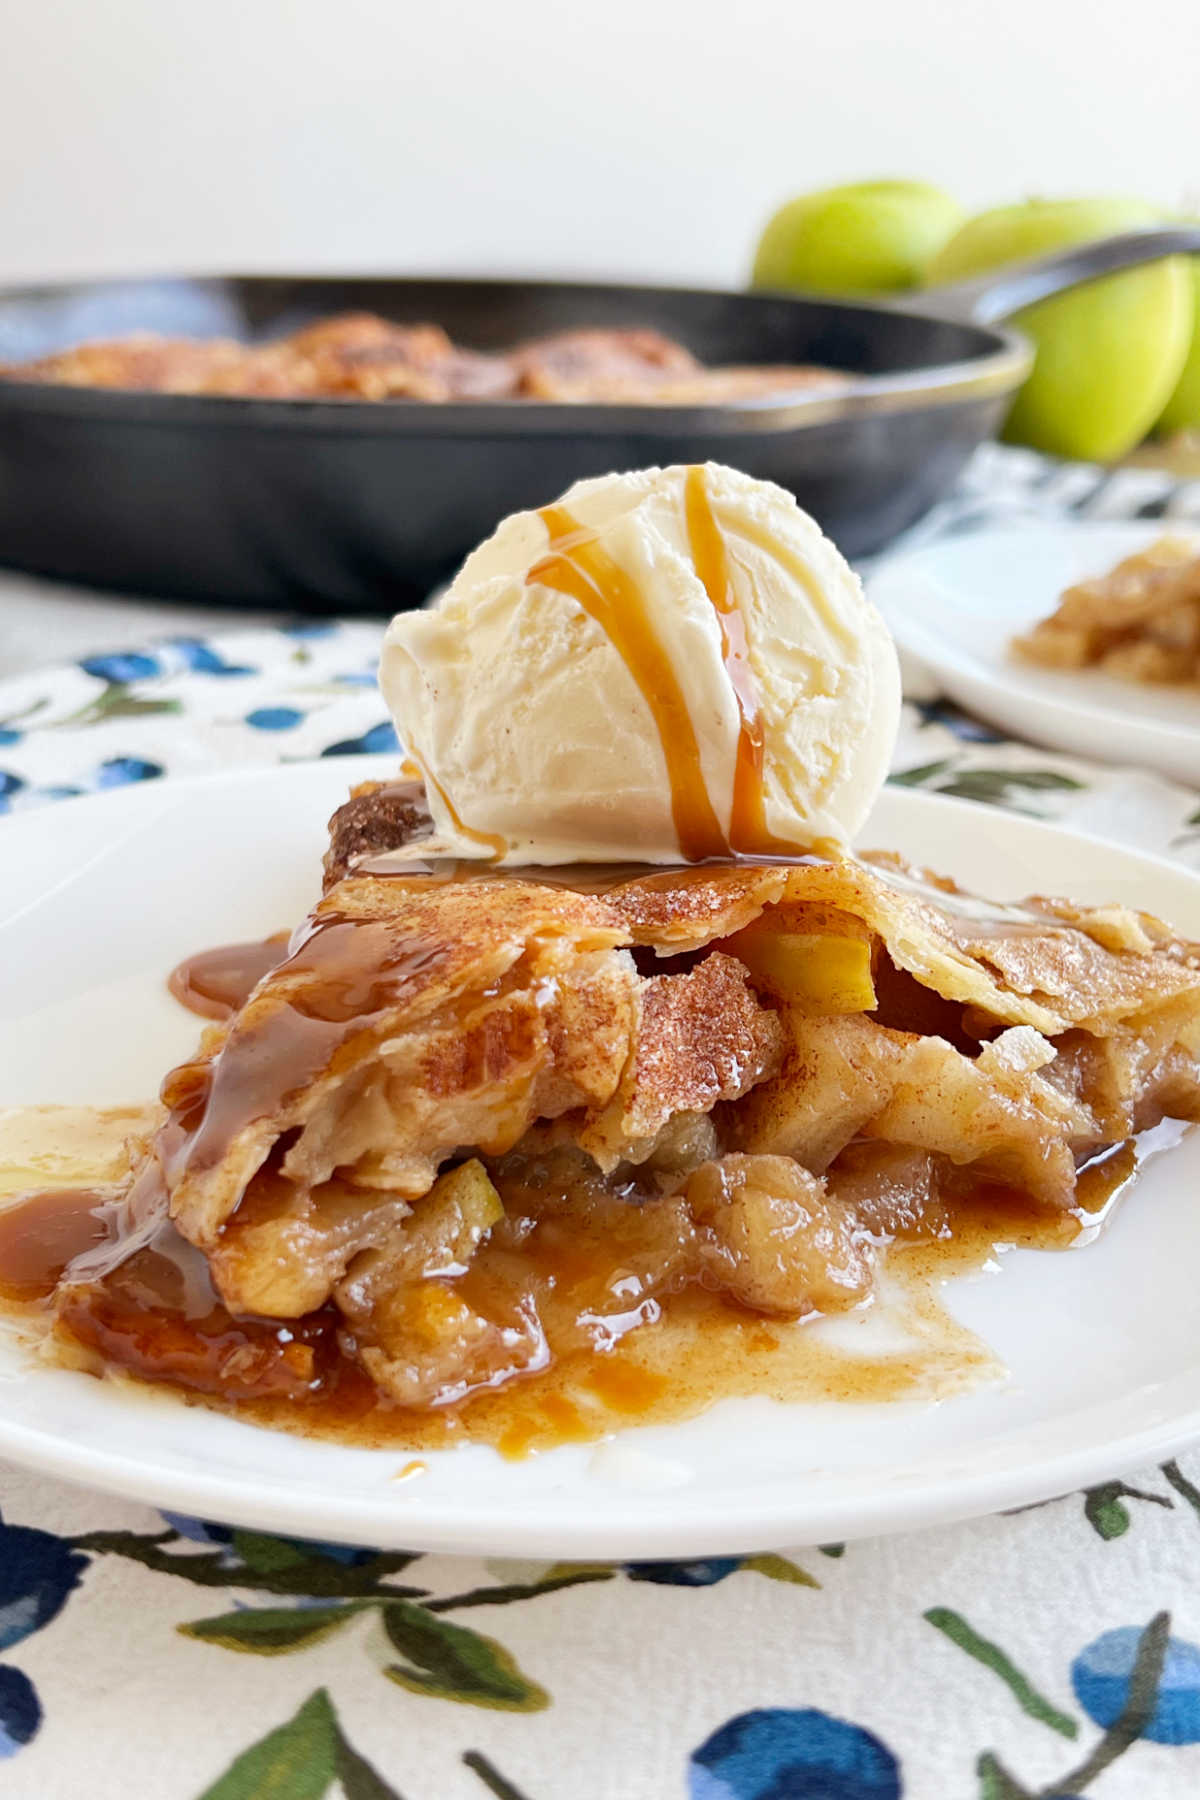 slice of cast iron skillet apple pie with scoop of ice cream on plate.